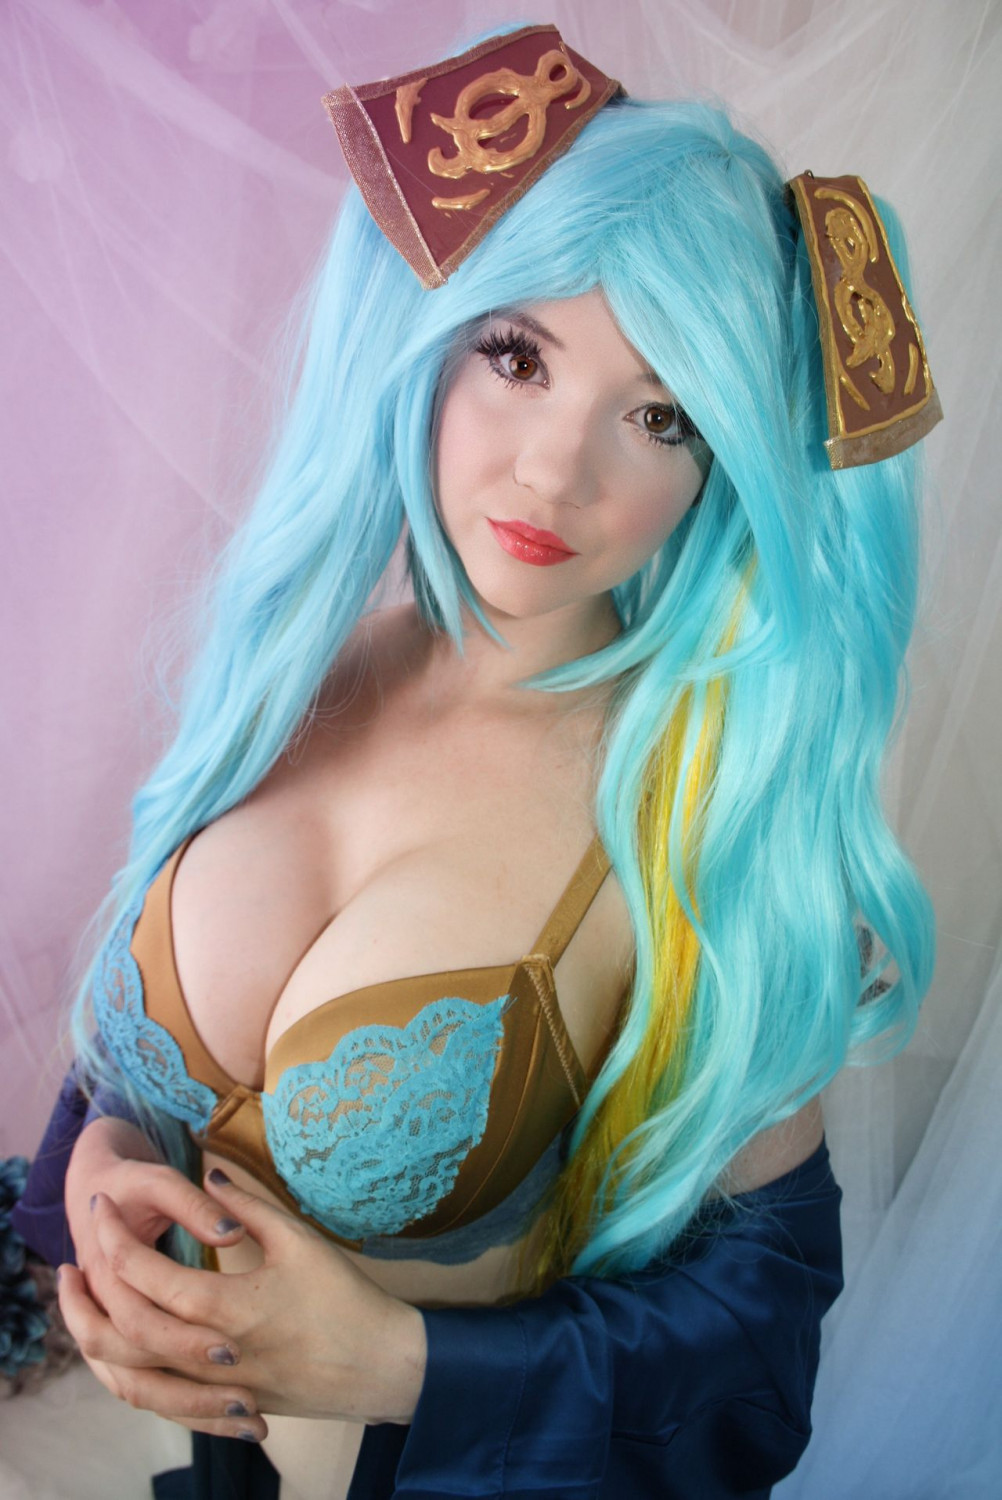 Huge Tits League - LillybetRose - HUGE TITS Sona League Of Legends Cosplay - FULL SET...